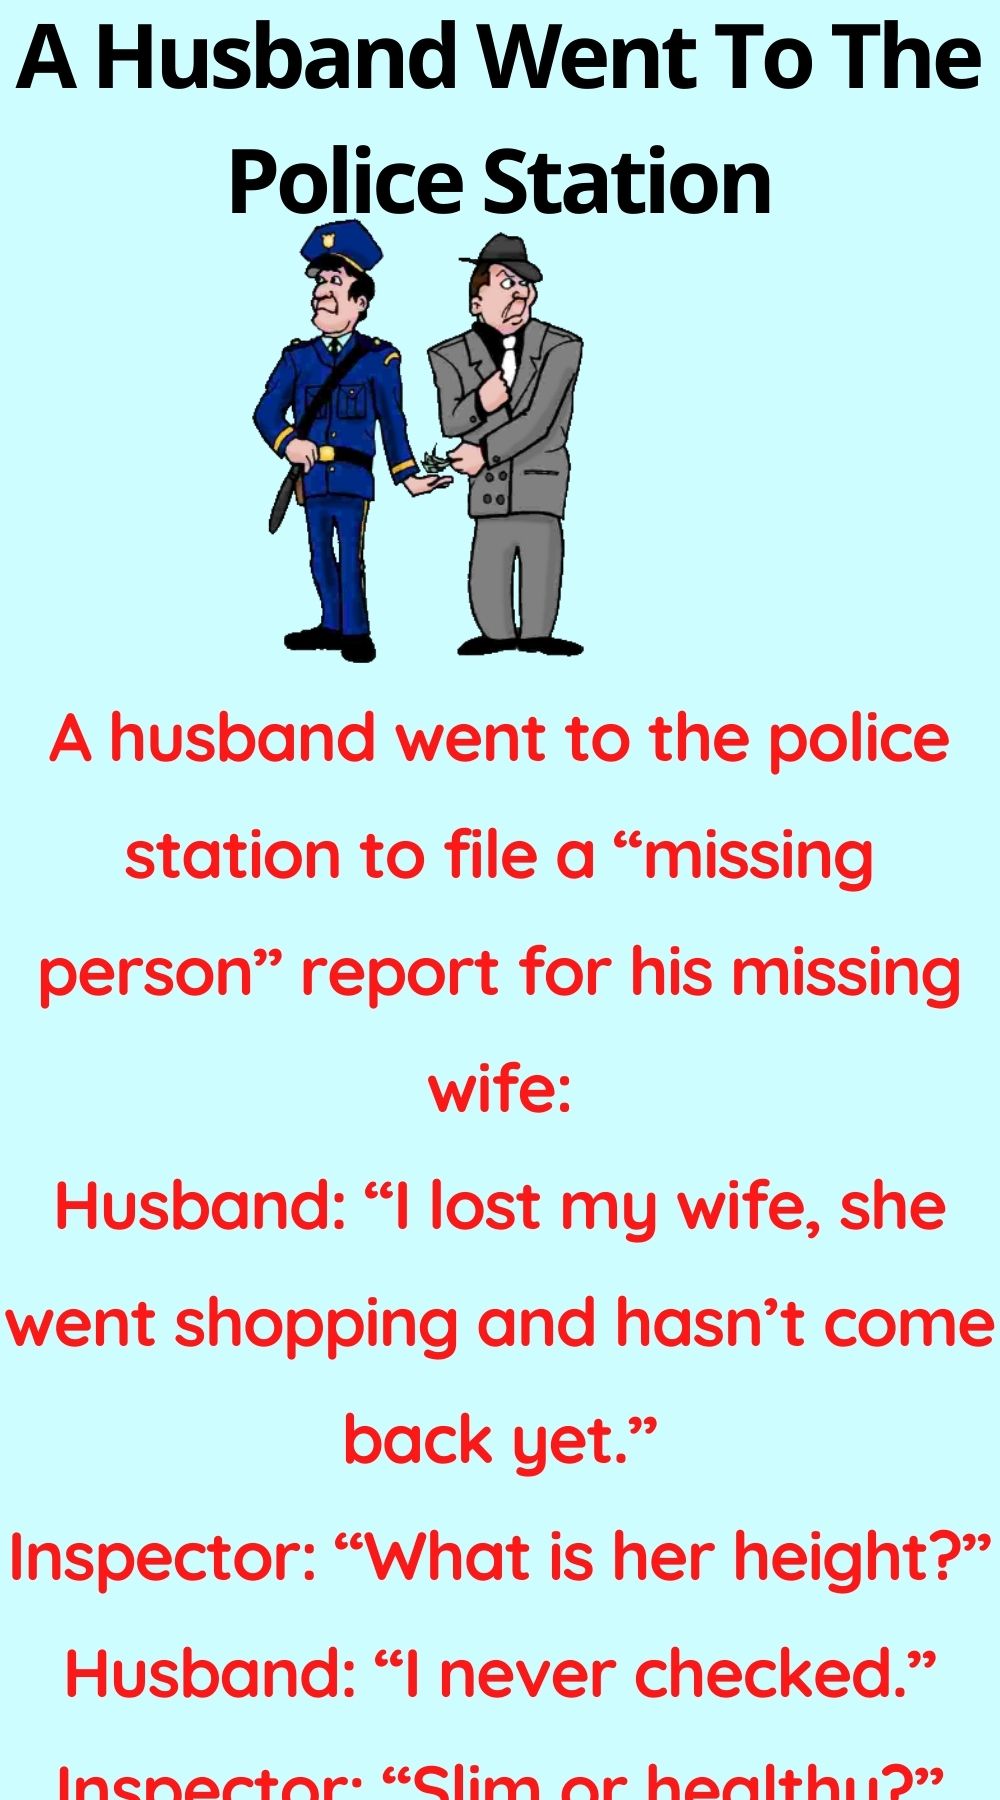 A Husband Went To The Police Station